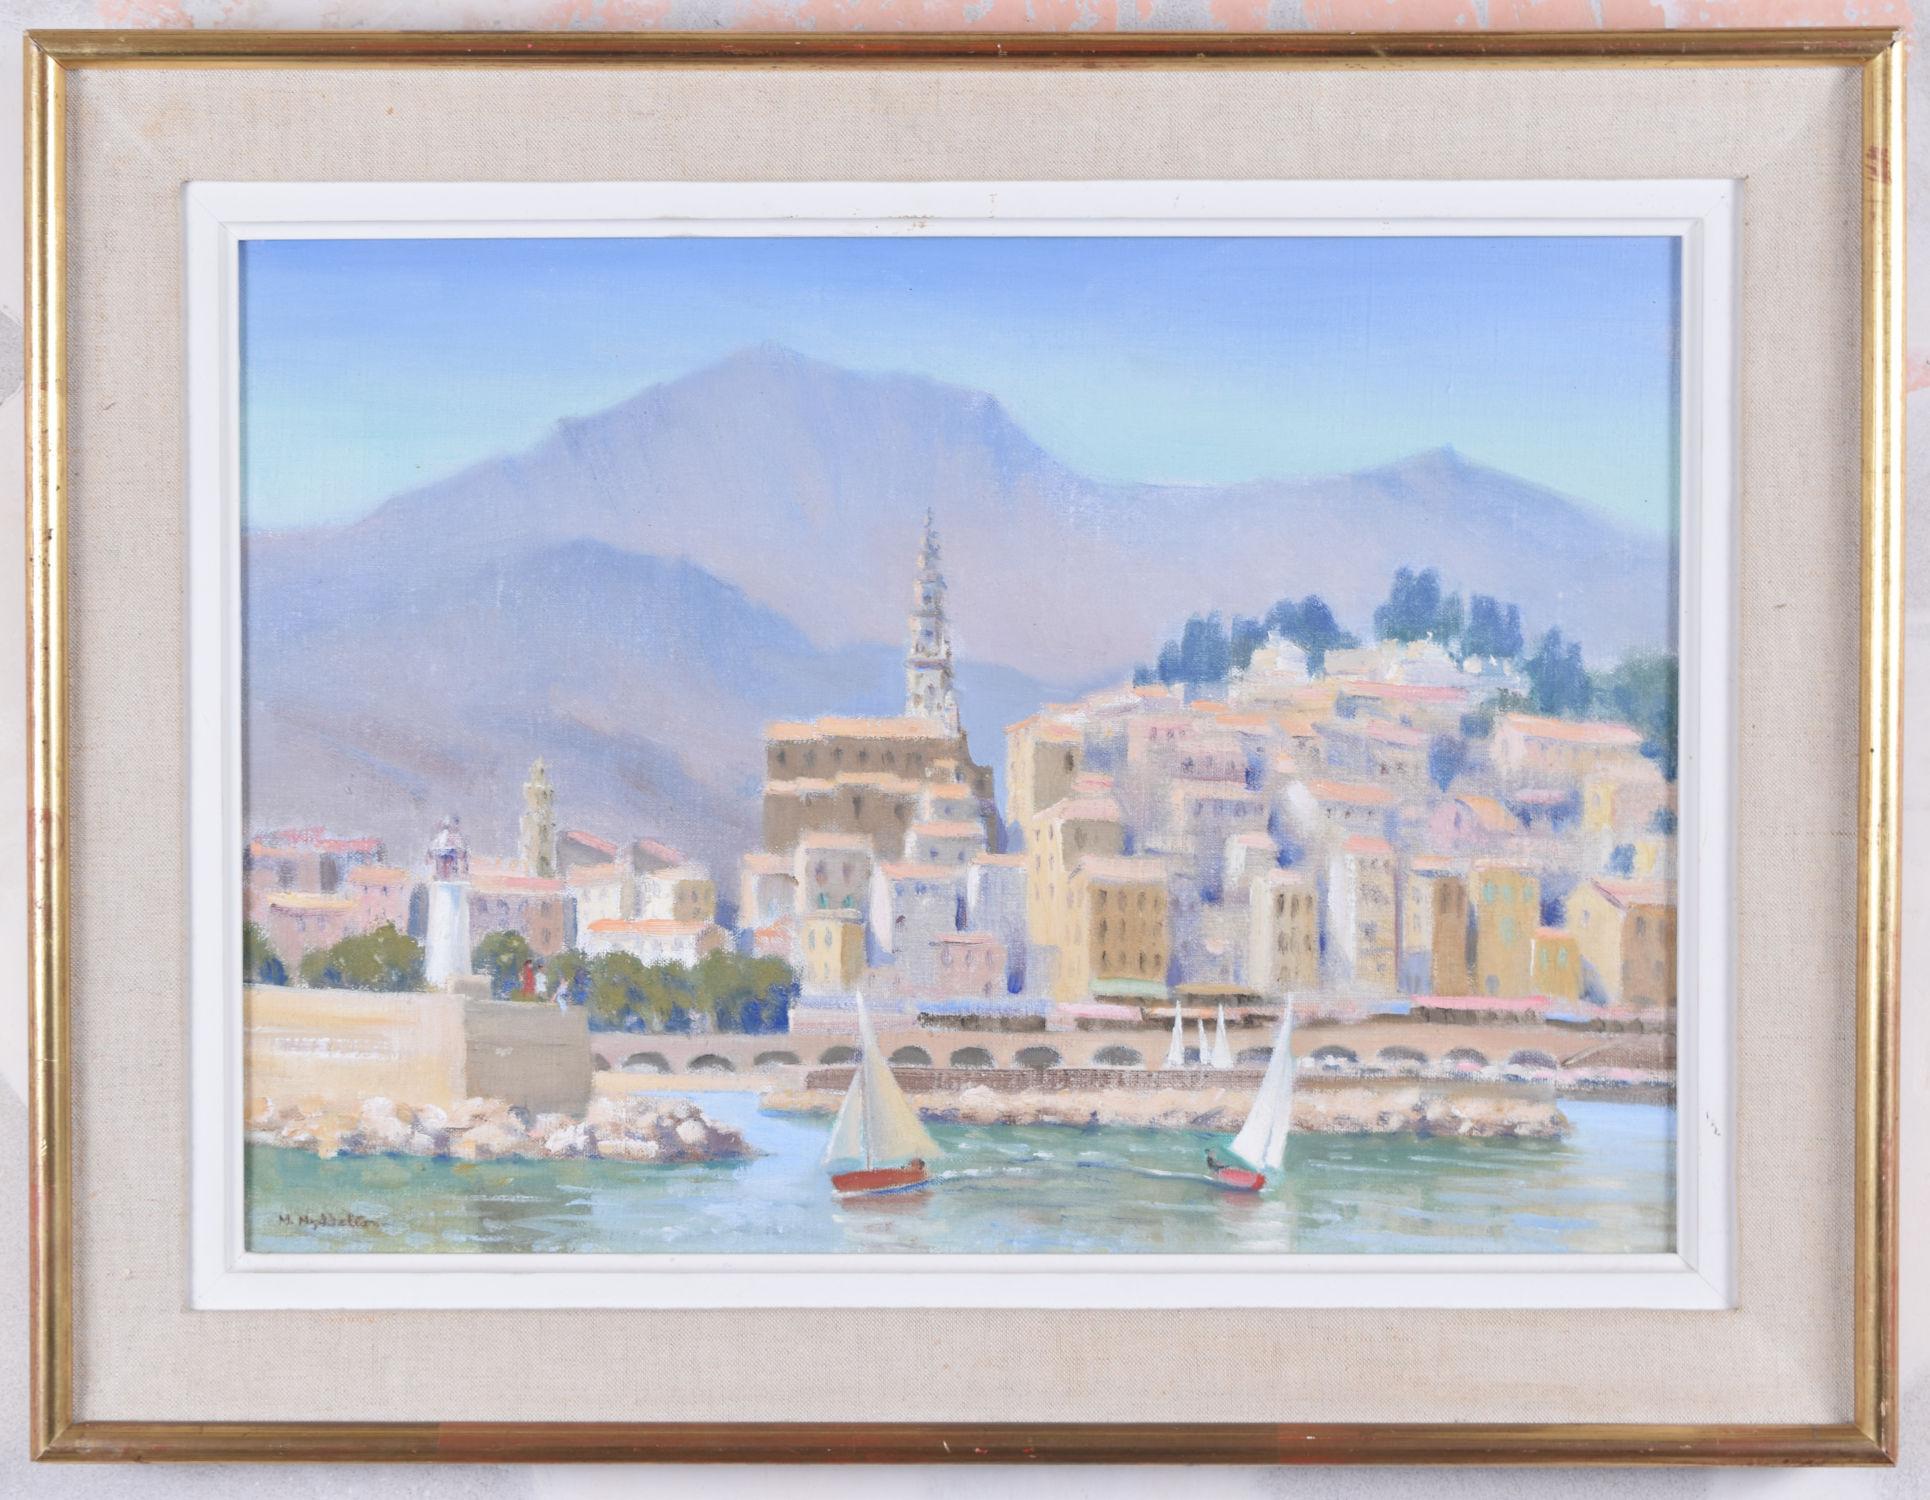 To see more, scroll down to "More from this Seller" and below it click on "See all from this Seller." 

Lady Margaret Myddleton (1910 - 2003)
Harbour at Menton
Oil on canvas
32 x 45 cm

Signed lower left, and titled on label to reverse.

Myddleton's